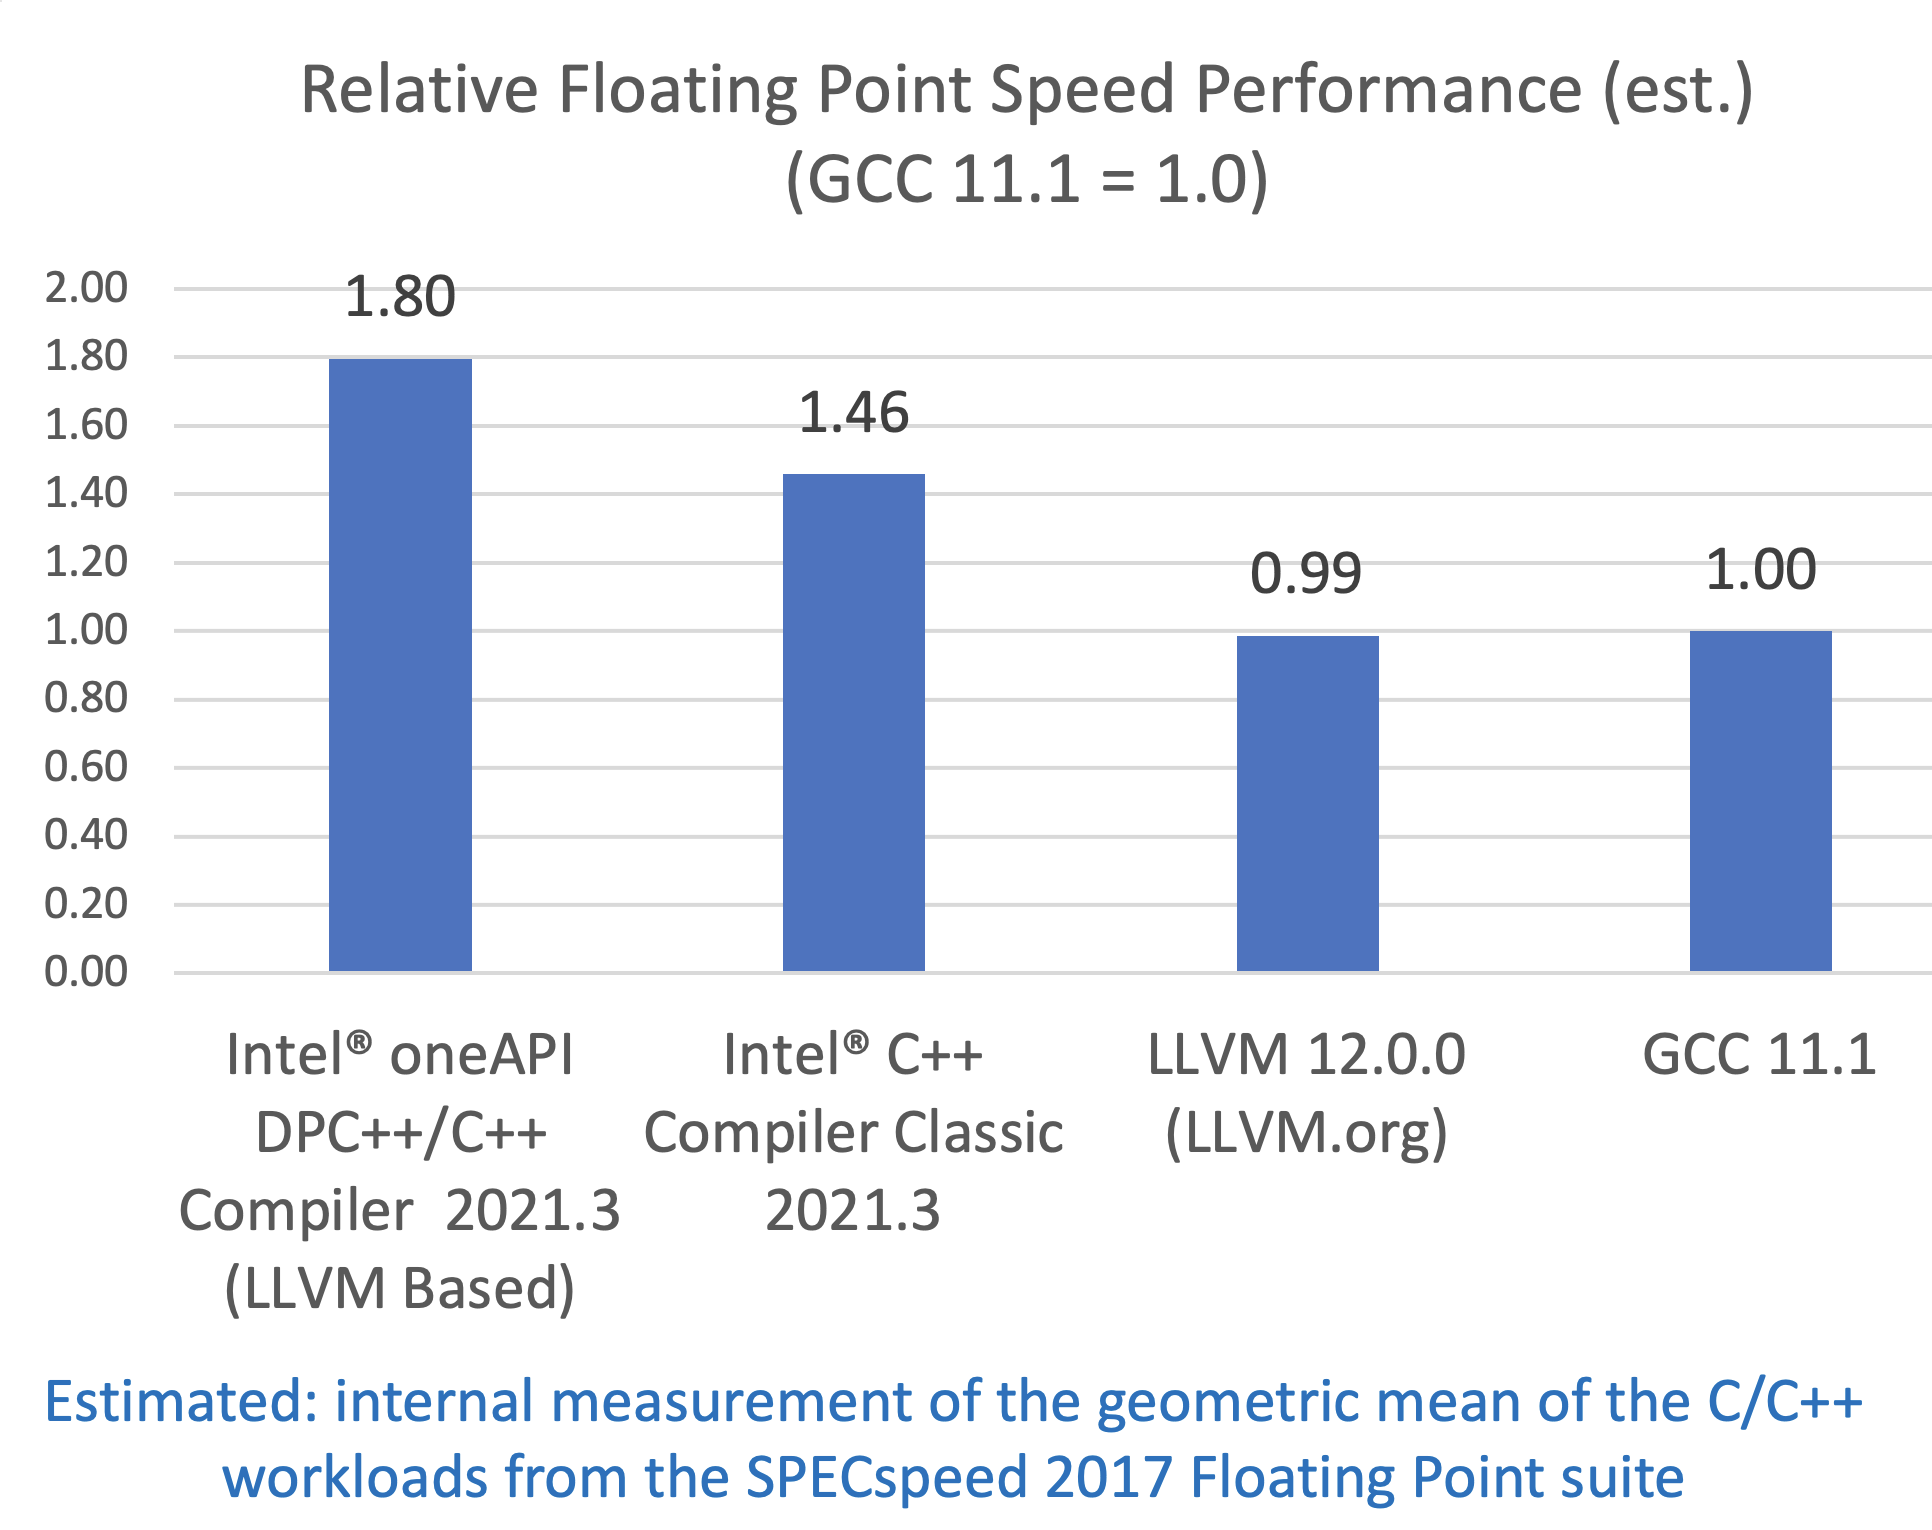 SPECspeed 2017 FP (Estimated) Performance advantage relative to other compilers on Intel® Xeon Platinum 8380 Processor